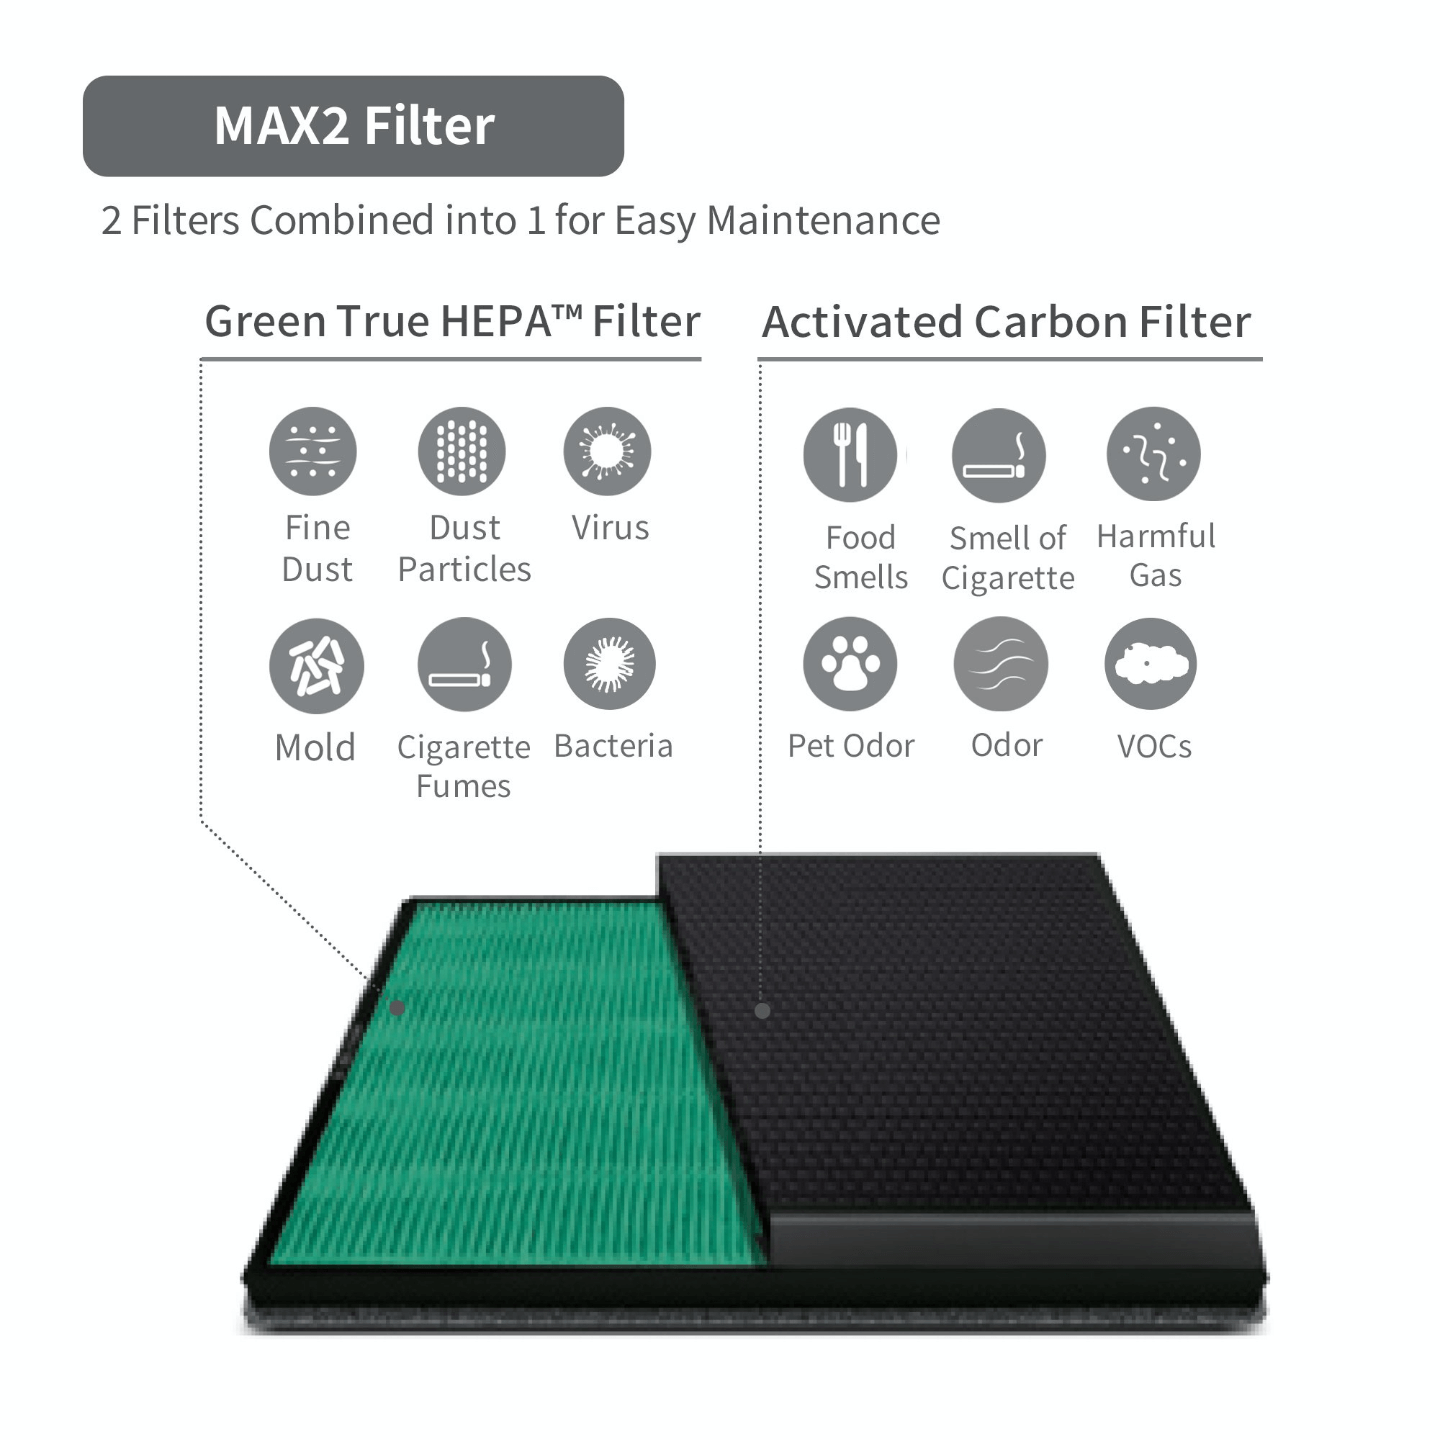 Coway Airmega 300 Max2 Filter Set showcasing HEPA filter and activated carbon filter properties